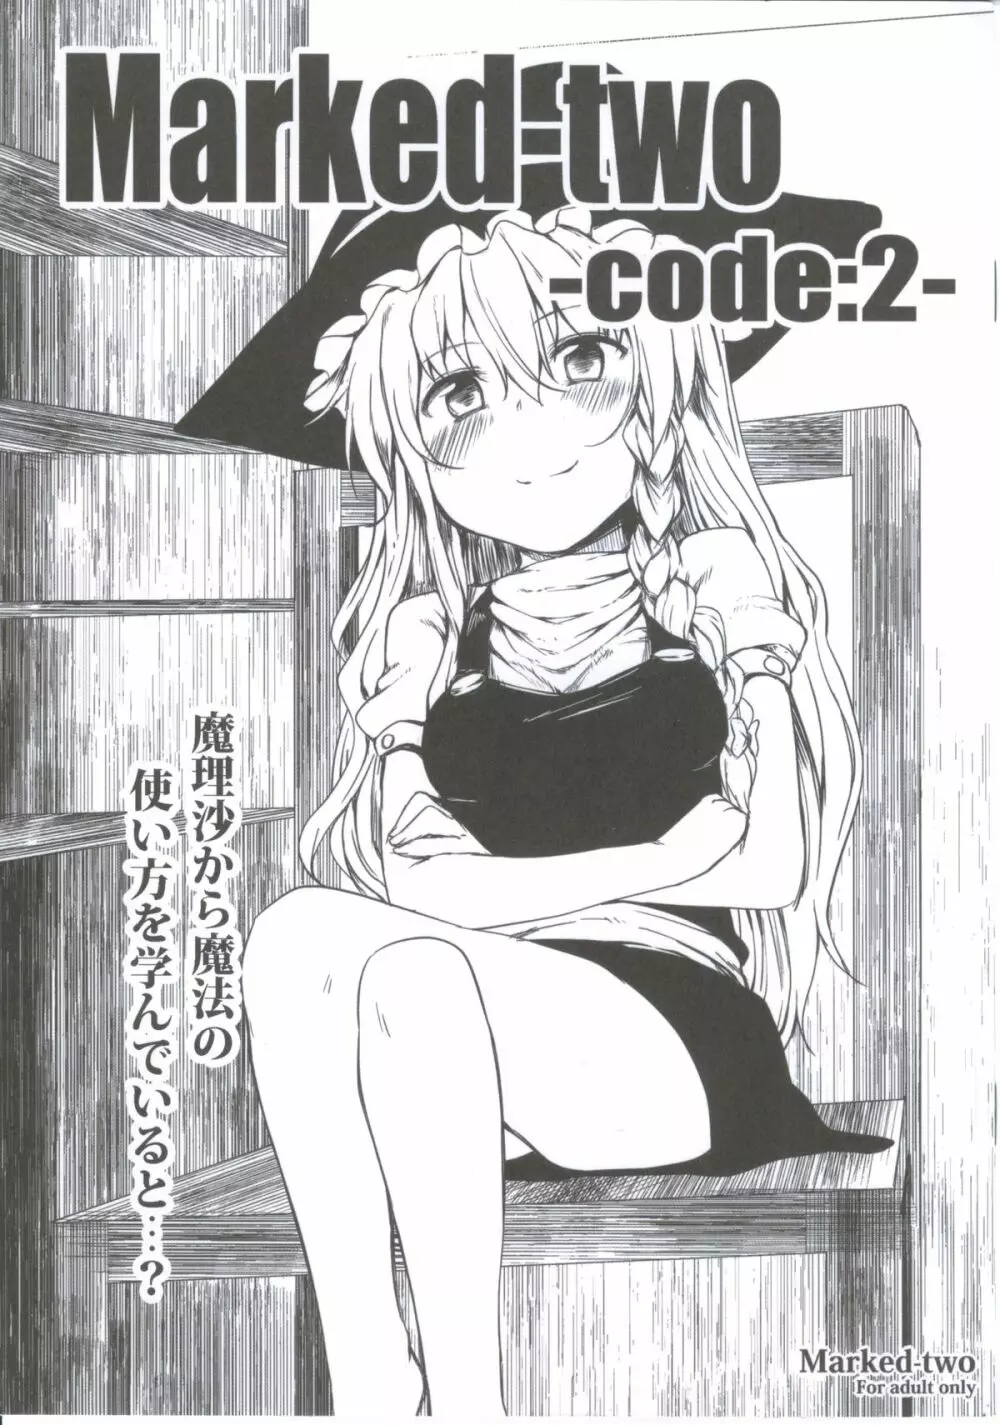 [Marked-two] Marked-two -code:2- (東方Project) 1ページ